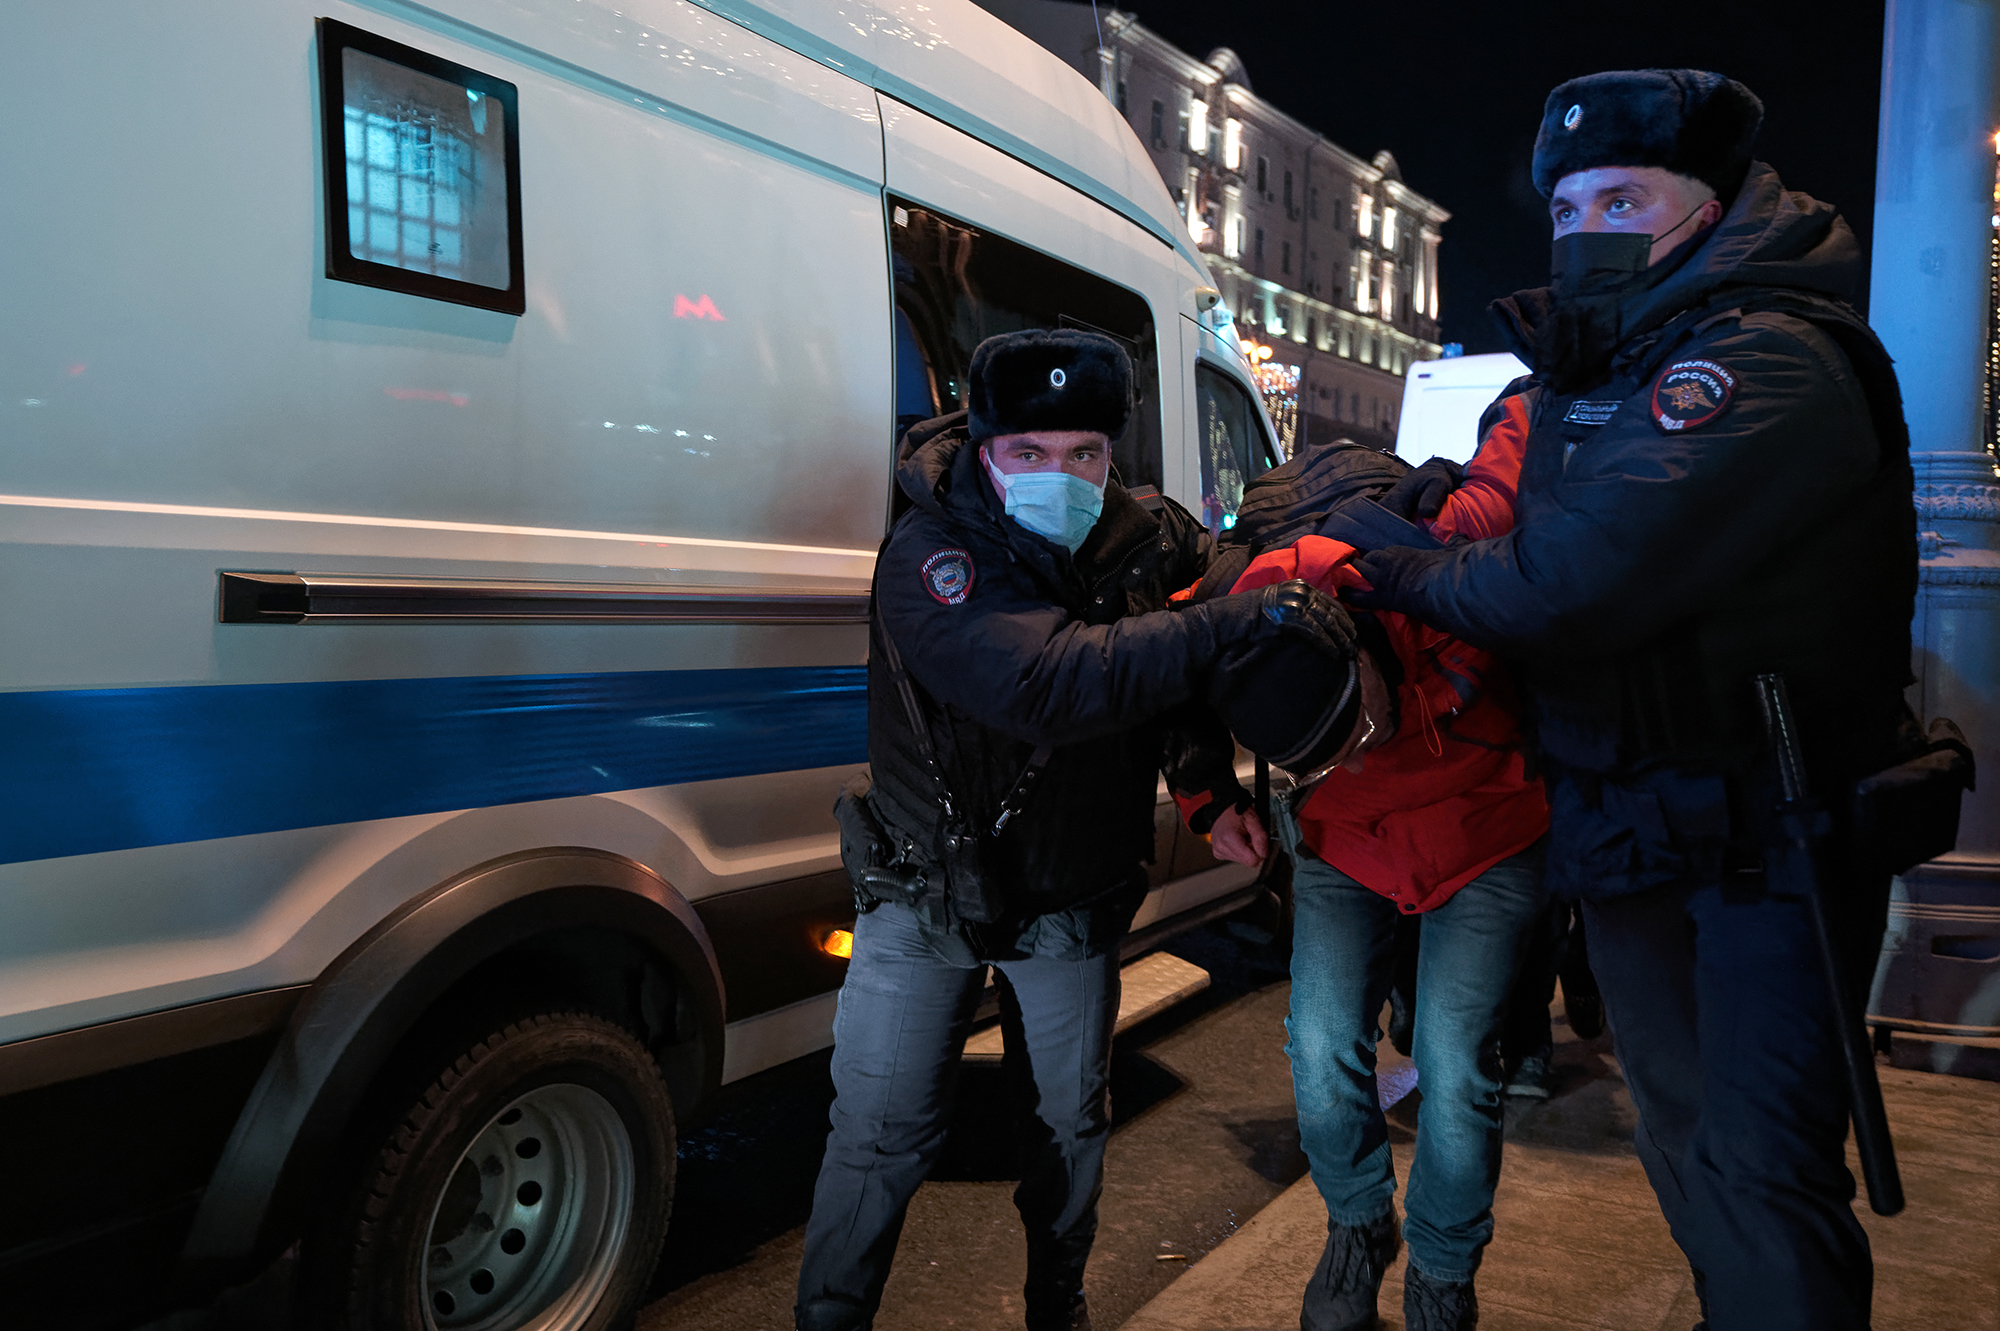 A demonstrator against the invasion of Ukraine is led away by police in Moscow, on February 24.